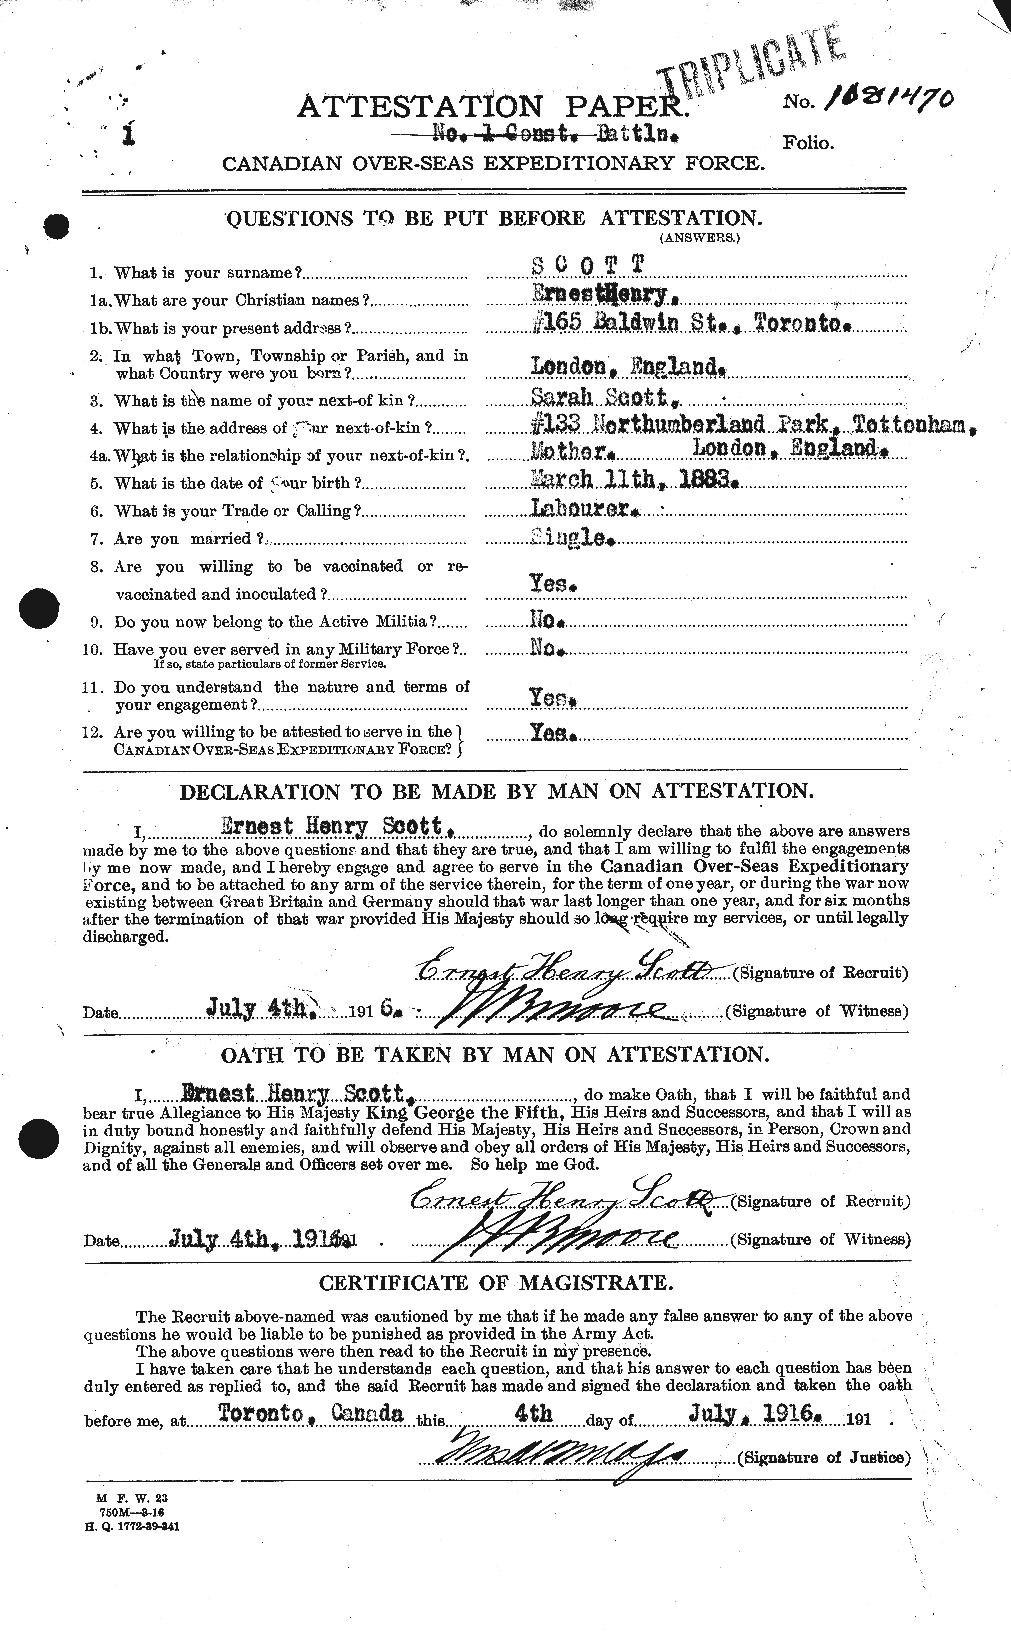 Personnel Records of the First World War - CEF 085010a